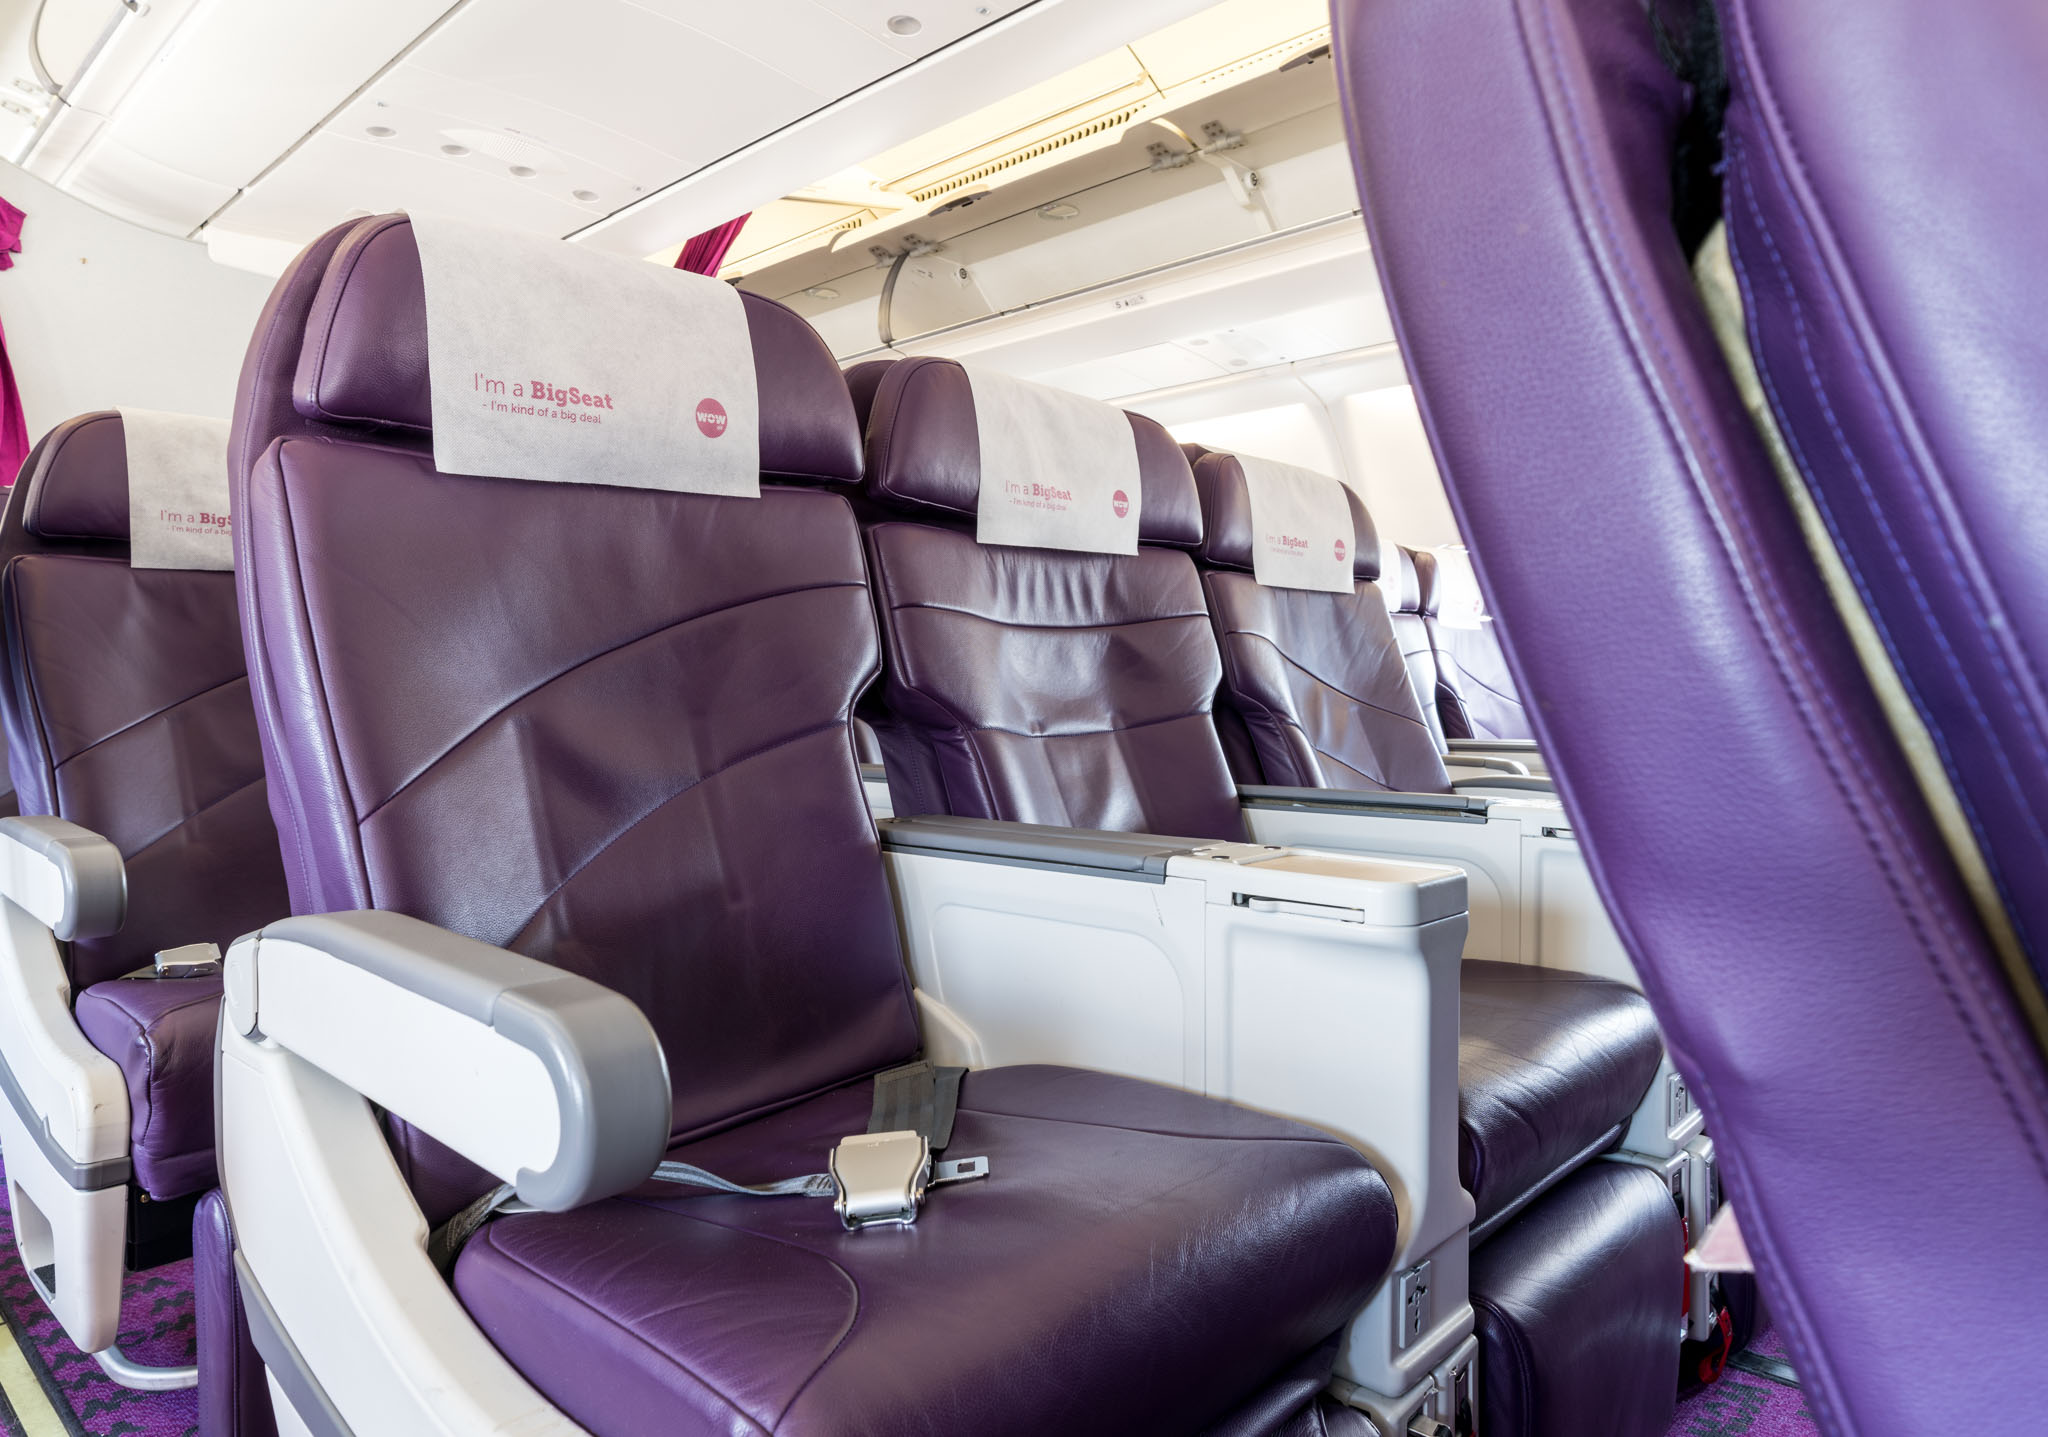 Review: WOW Air Big Seat Reykjavik – Dallas (There was no WOW